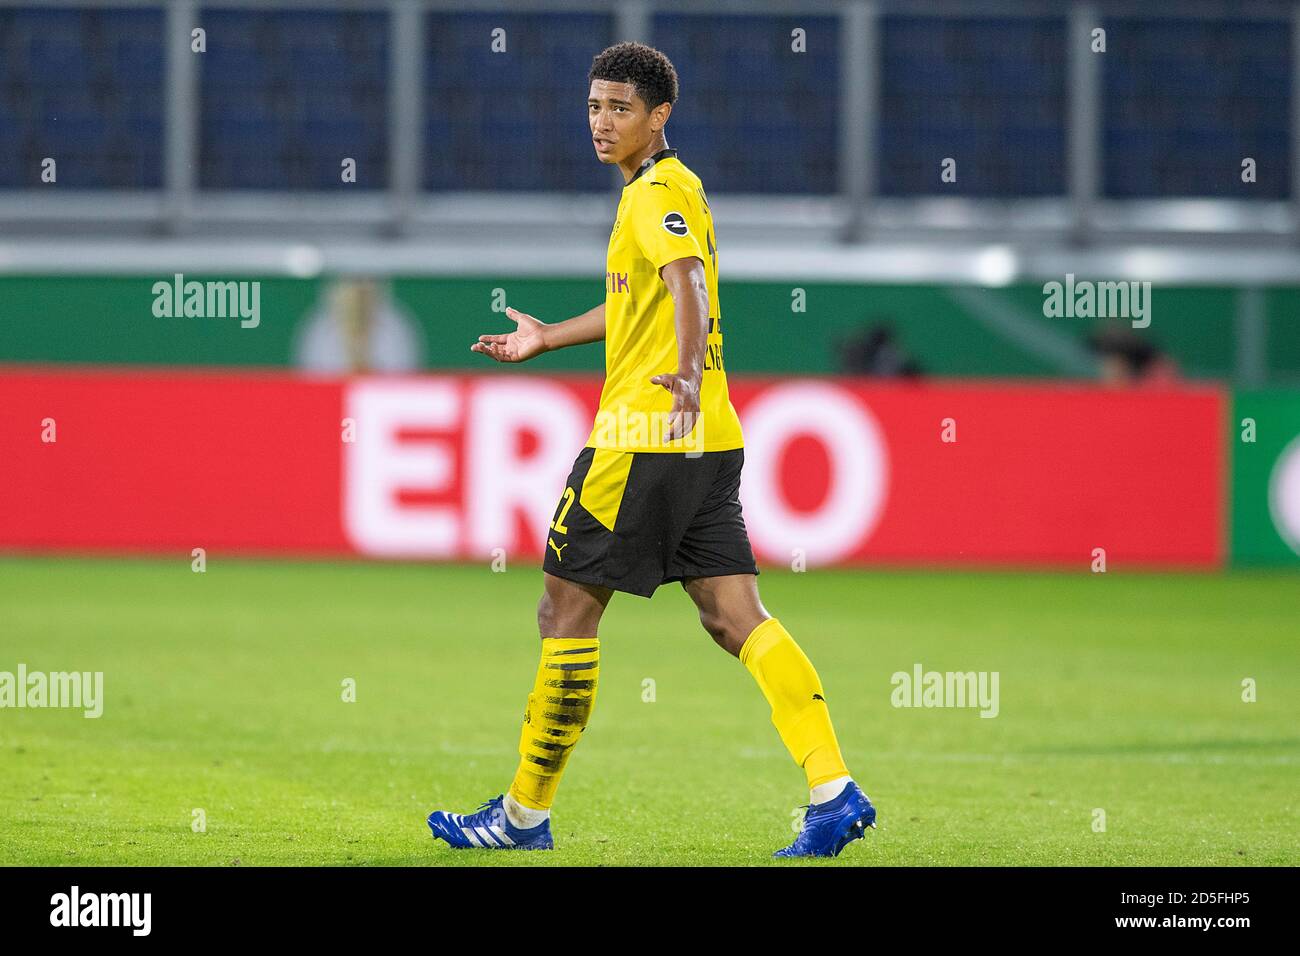 Jude BELLINGHAM (DO), whole figure, looks perplexed with outstretched arms; gesture, gesture; Soccer DFB Pokal 1st round, MSV Duisburg (DU) - Borussia Dortmund (DO) 0: 5, on September 14, 2020 in Duisburg/Germany. | usage worldwide Stock Photo